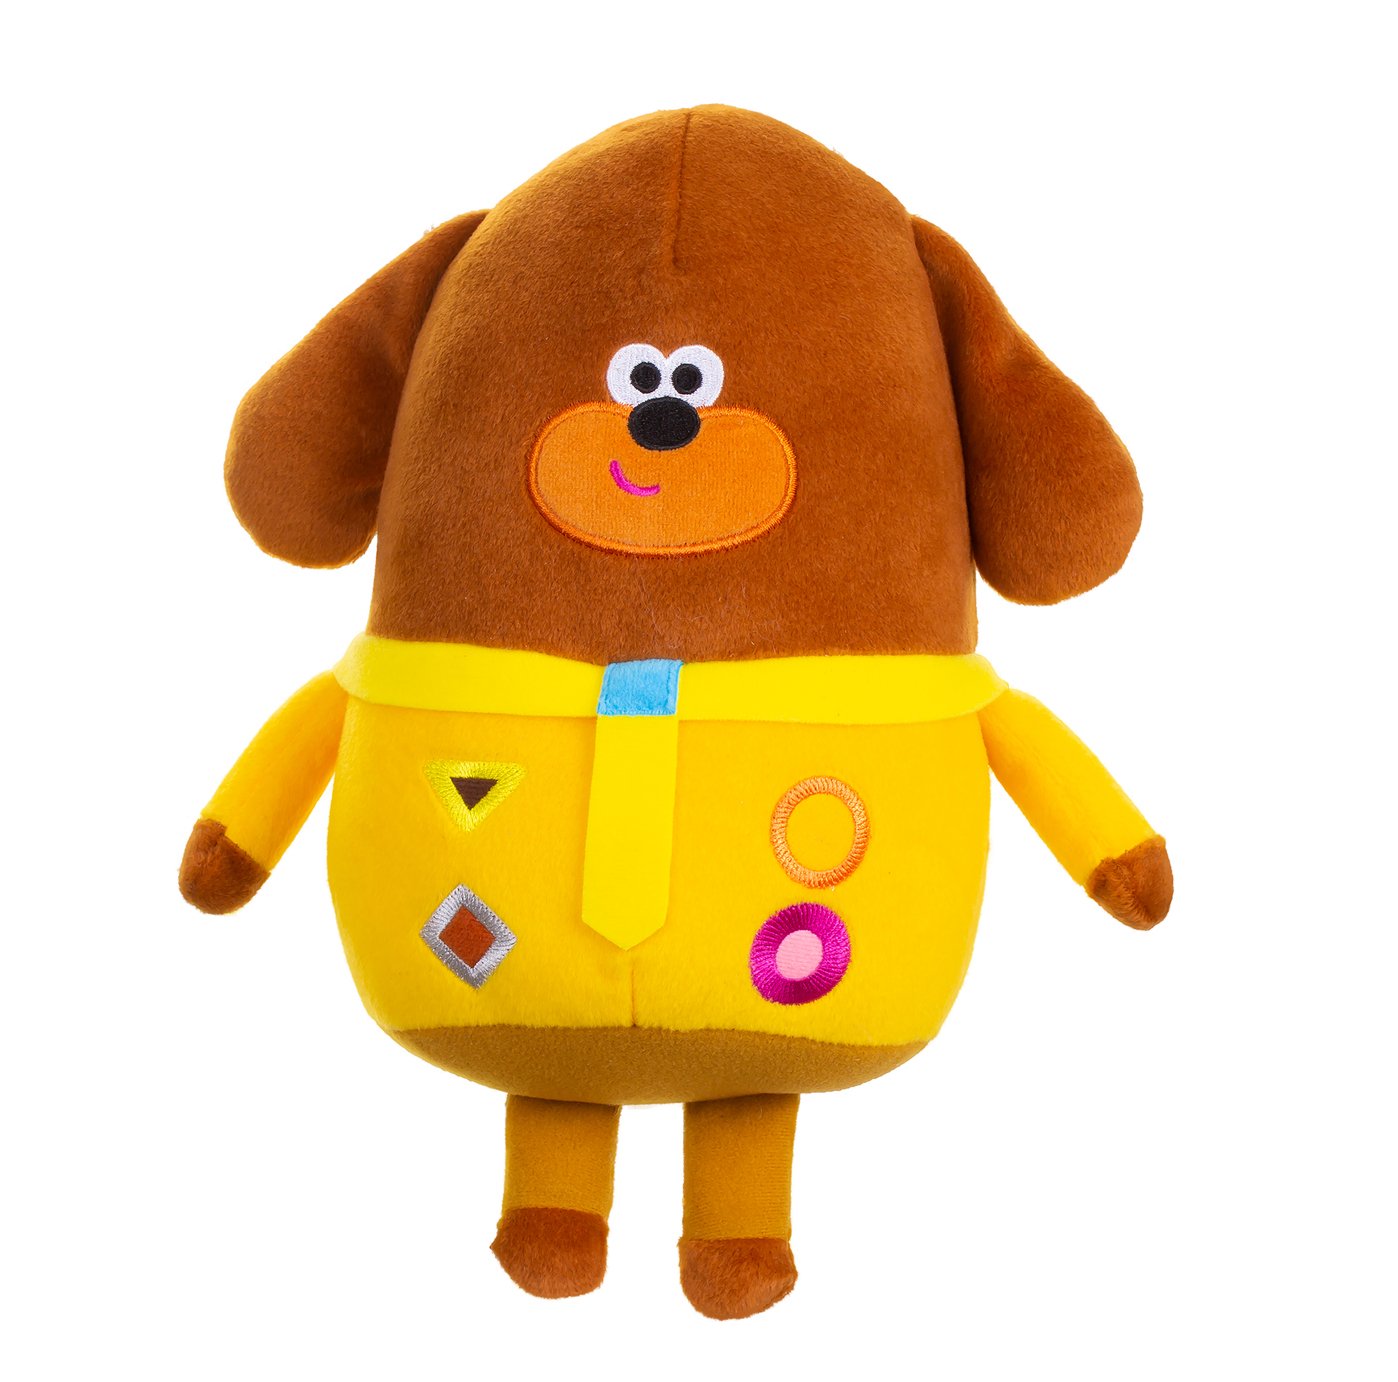 Hey Duggee Talking Duggee Soft Toy review